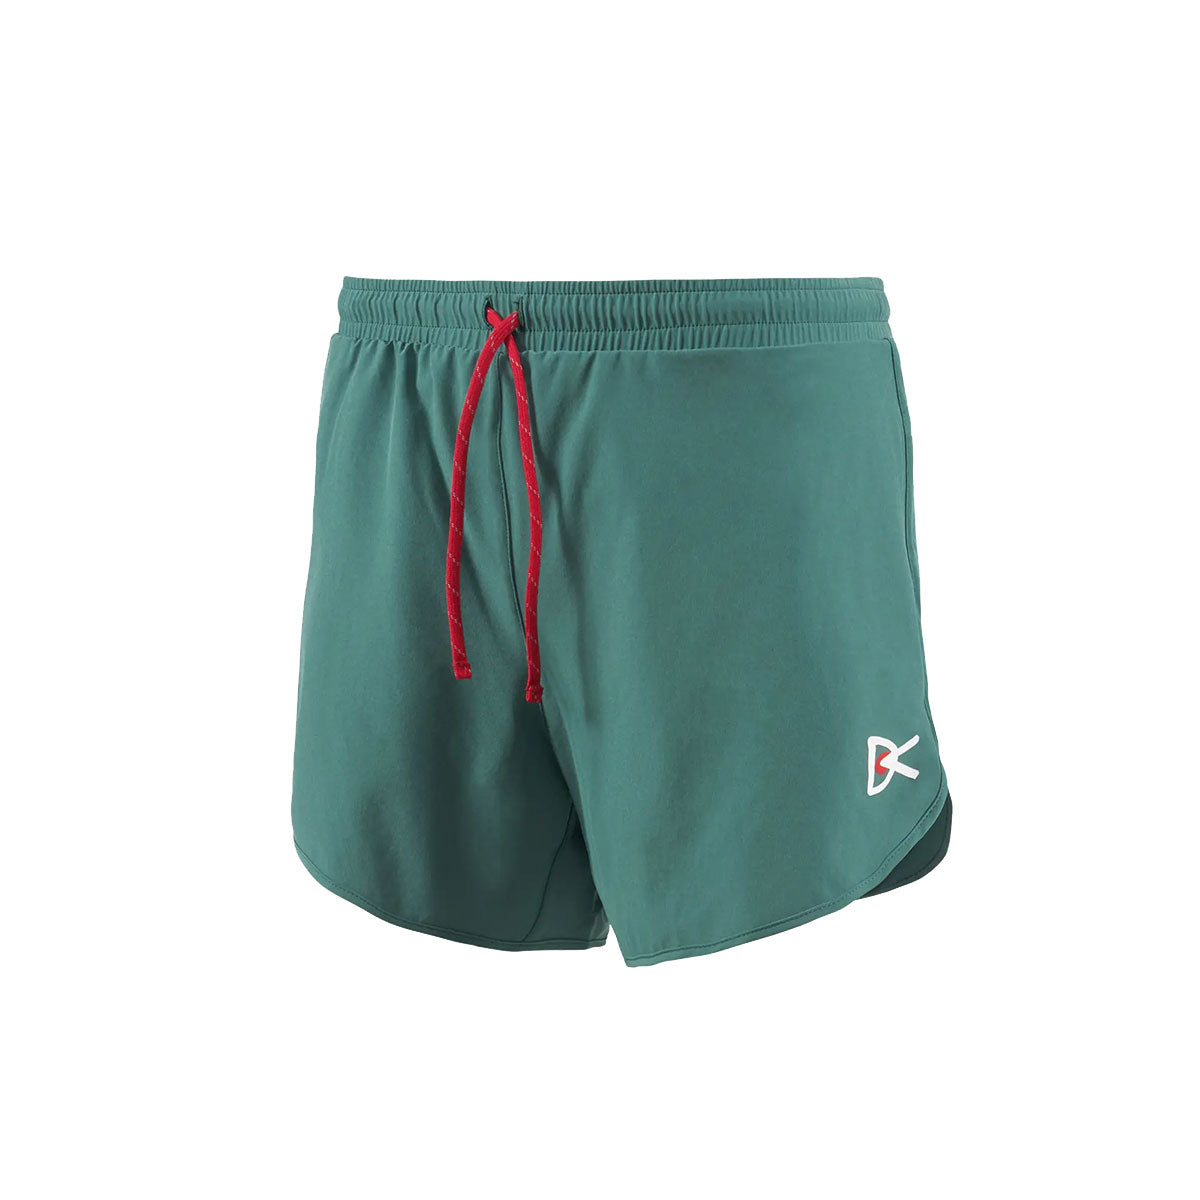 District Vision 5in Training Shorts